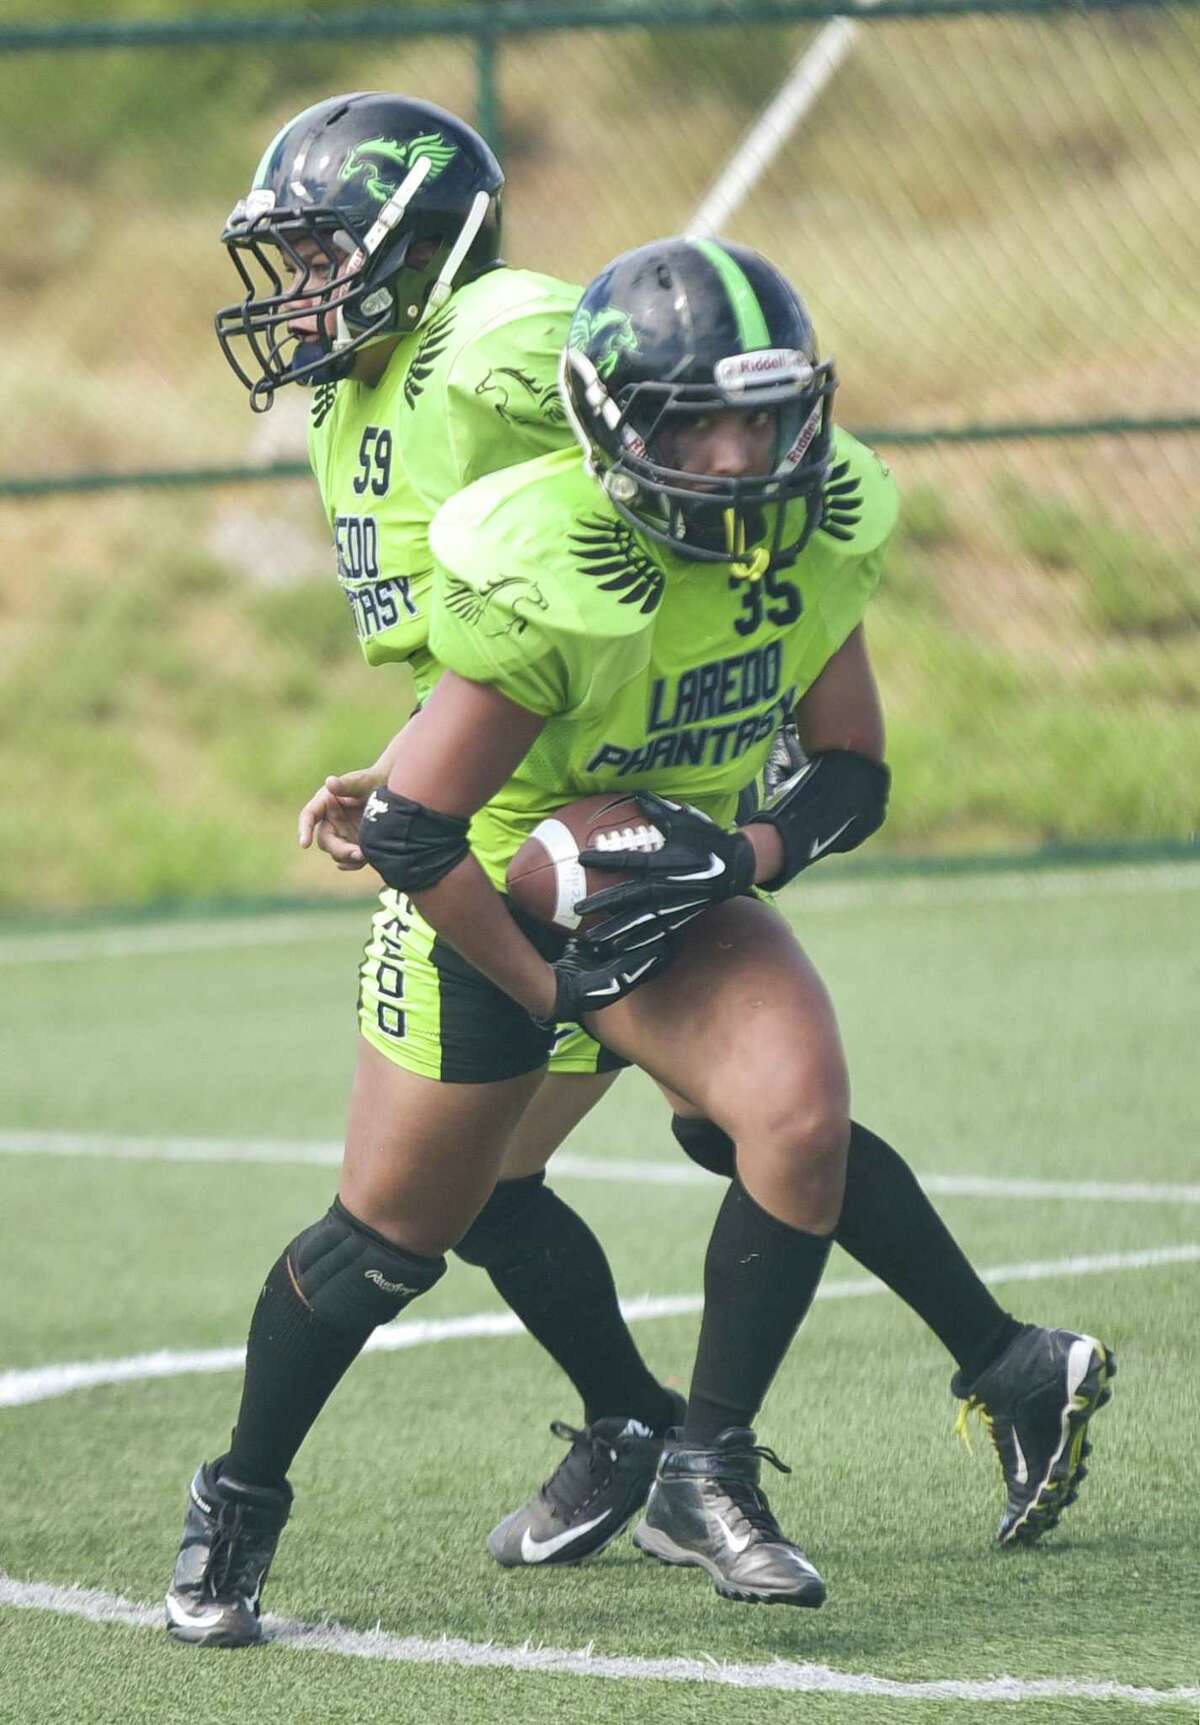 Phantasy running back Norma Estrada ran for 100 yards and three touchdowns in the second half of last week’s 54-32 loss to the South Texas Generals.